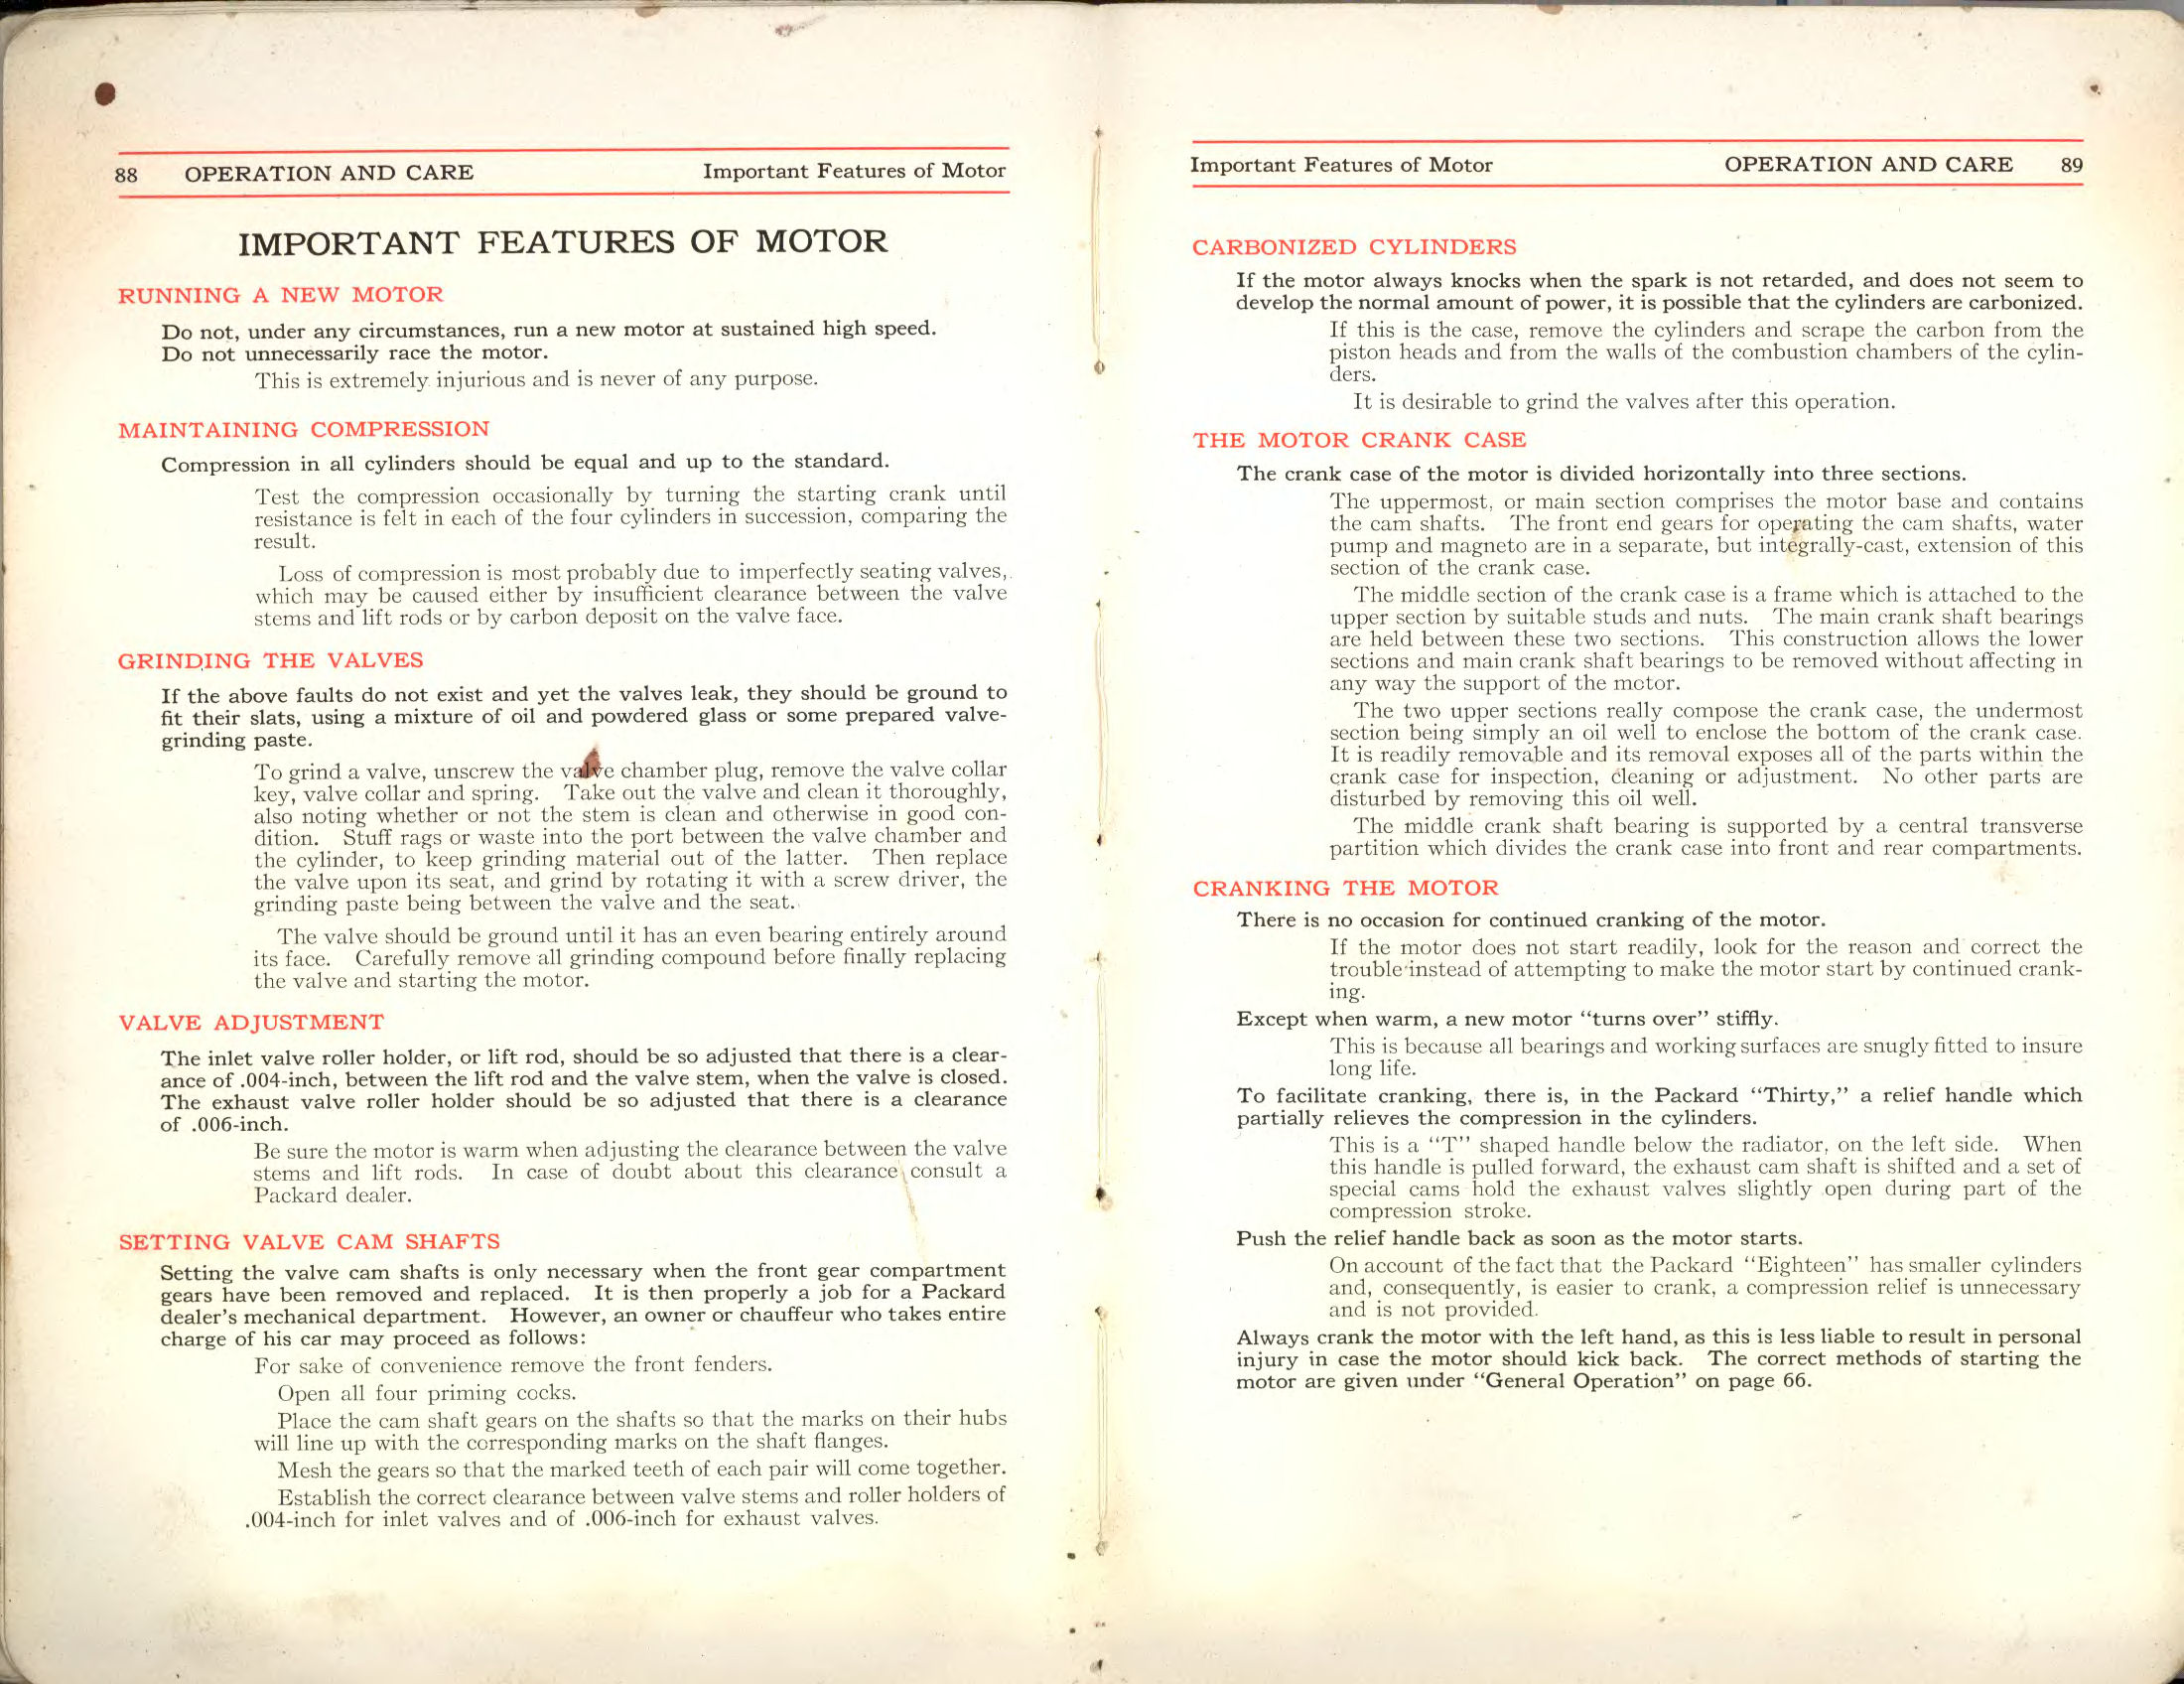 1911 Packard Owners Manual Page 56